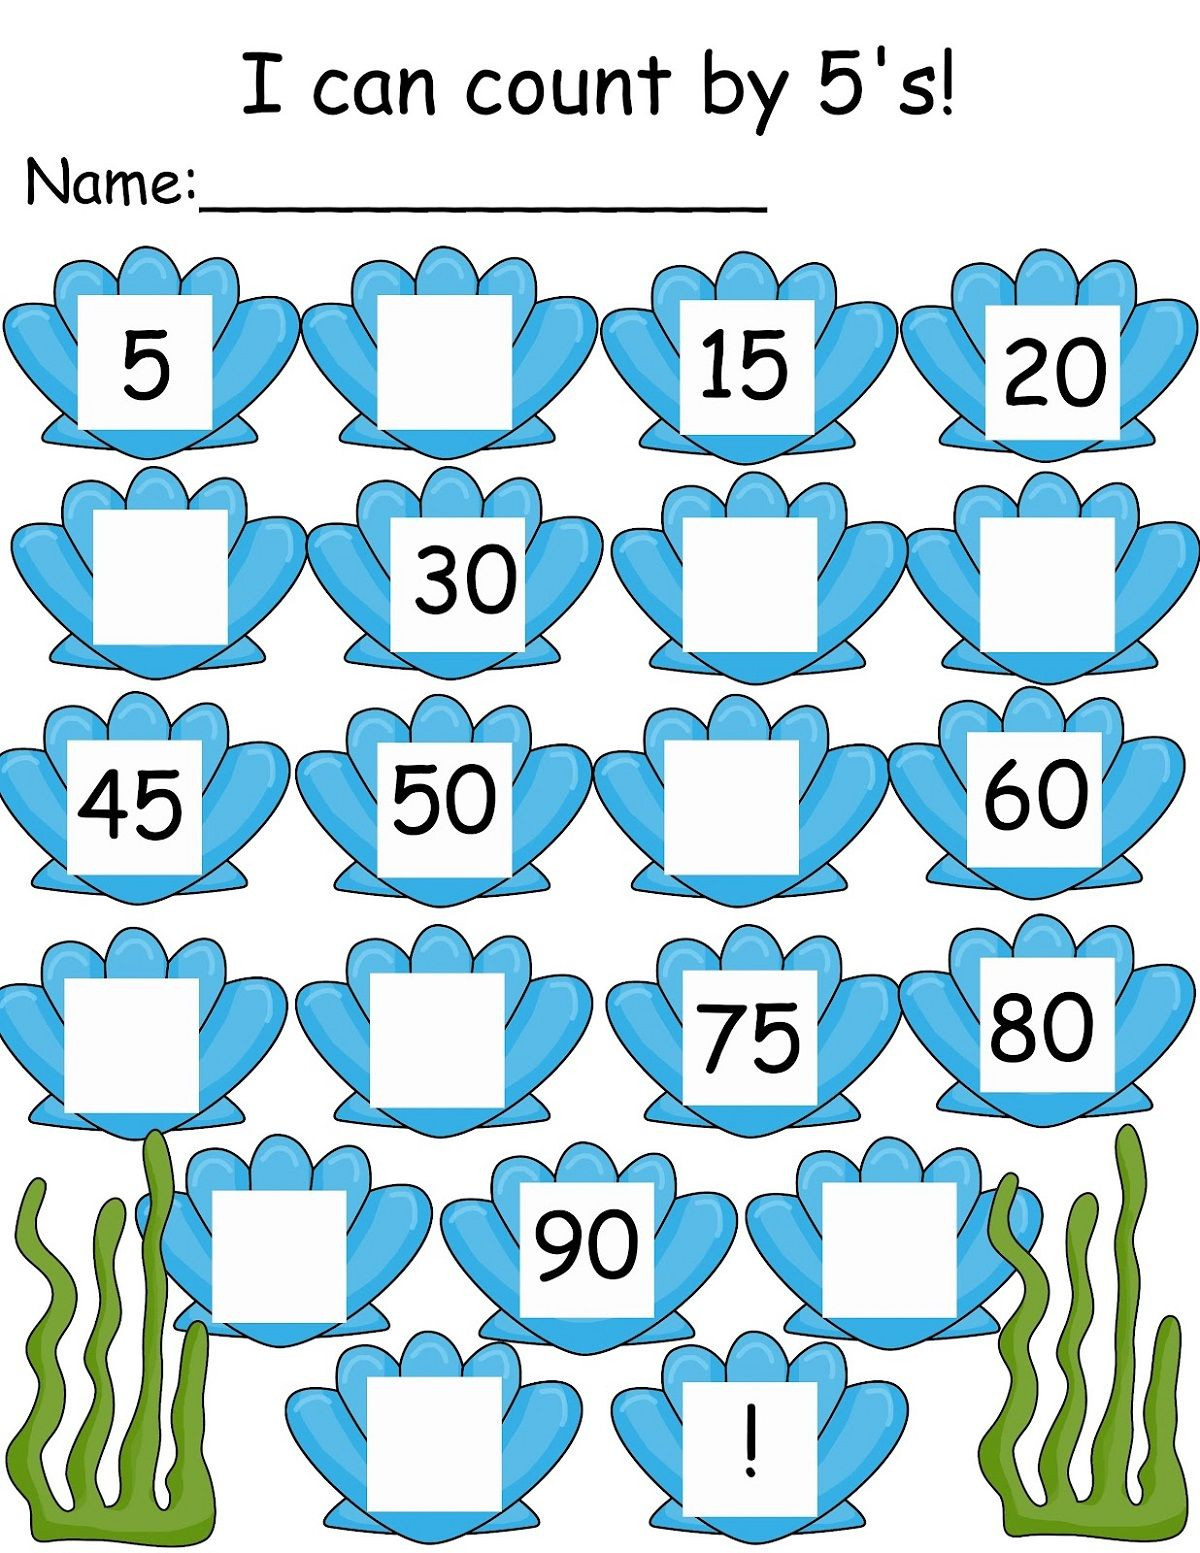 Counting by 5s Worksheet Count by 5s Worksheet for Kids